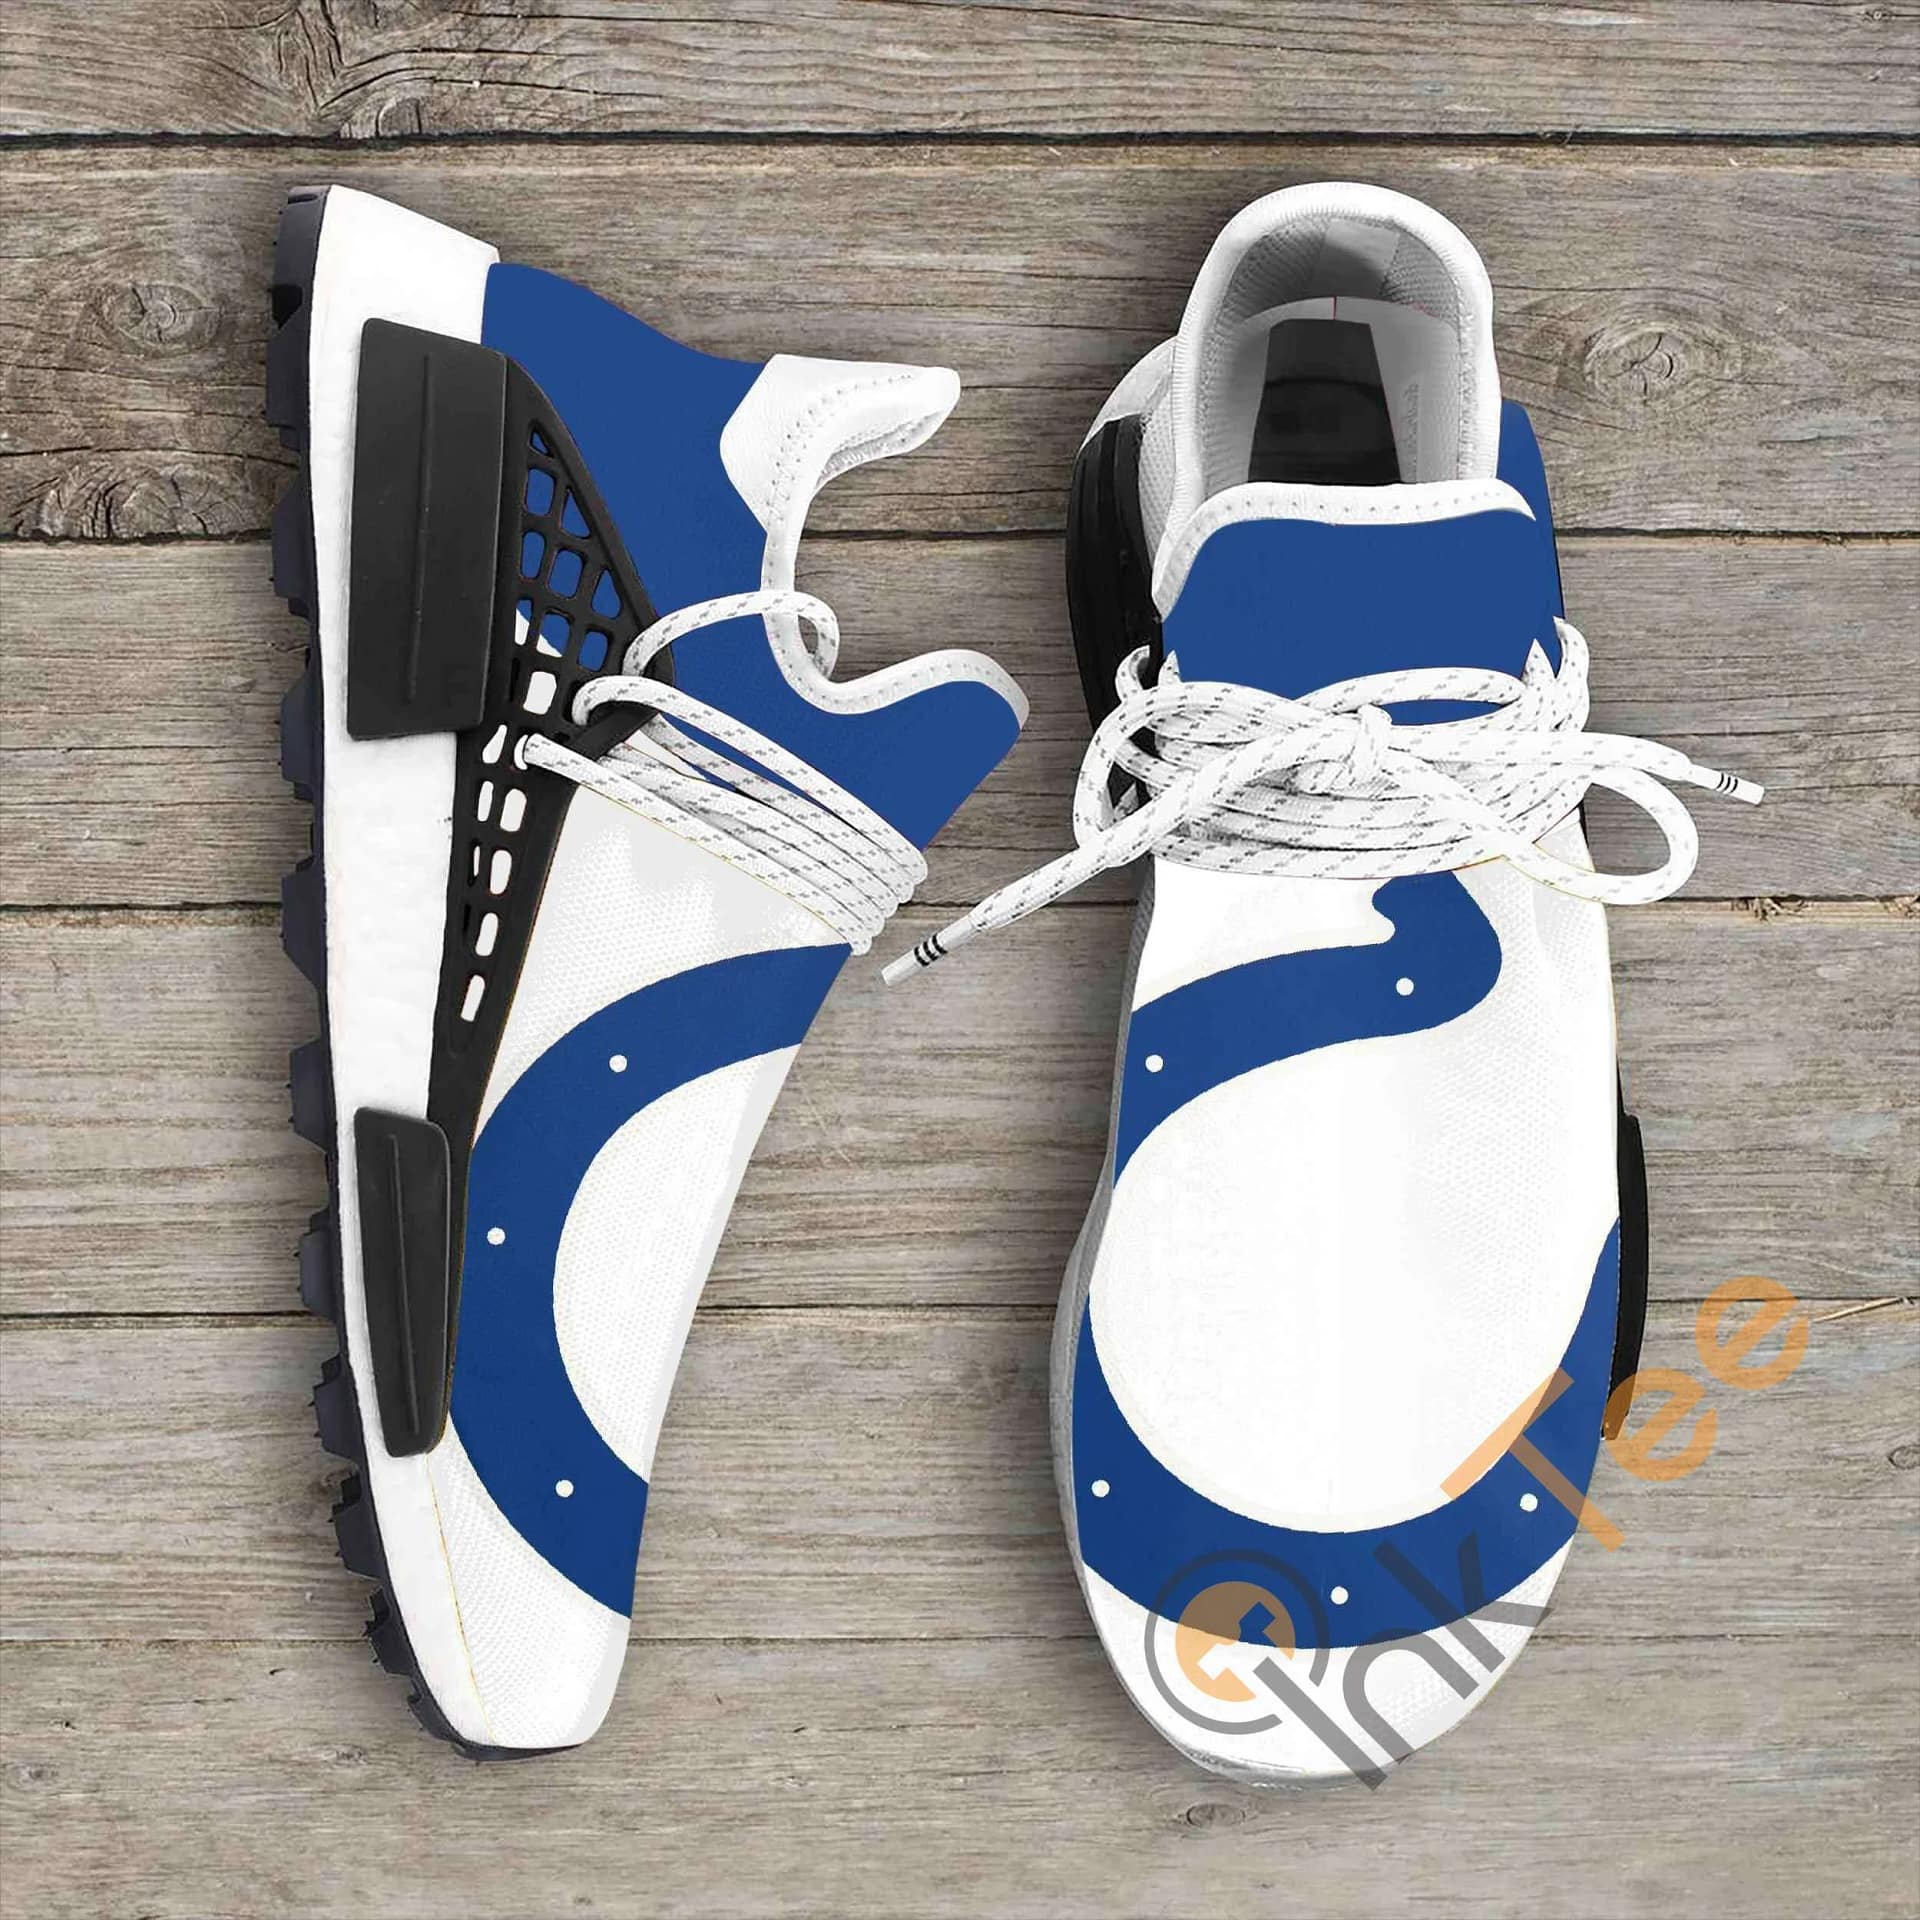 Indianapolis Colts Nfl NMD Human Shoes